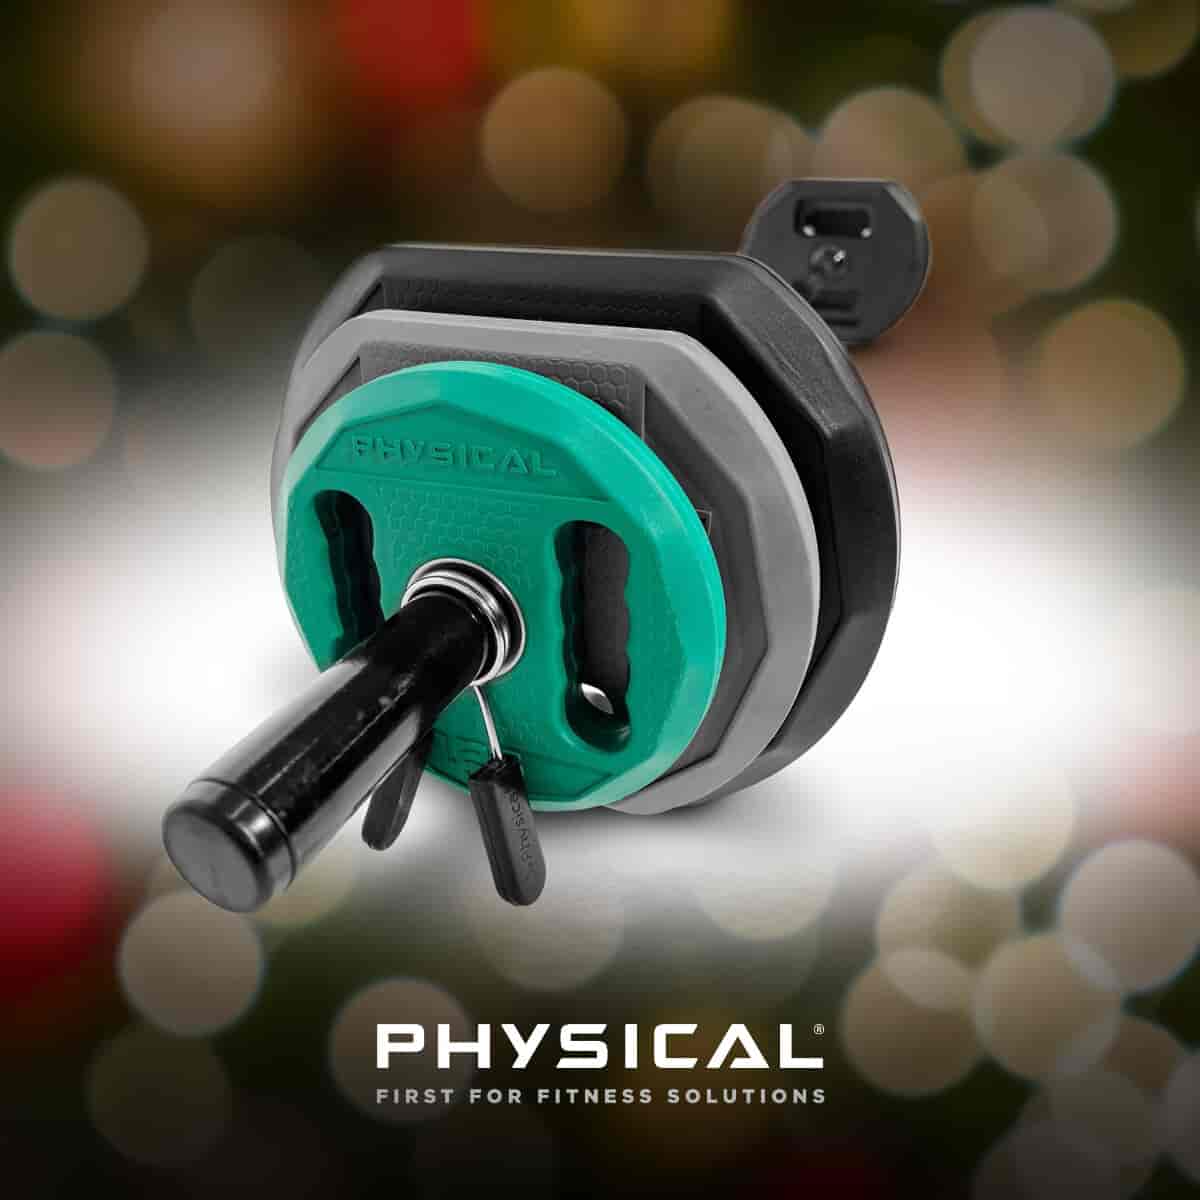 Physical Christmas Gift Guide - RBX Rubber Pump Set